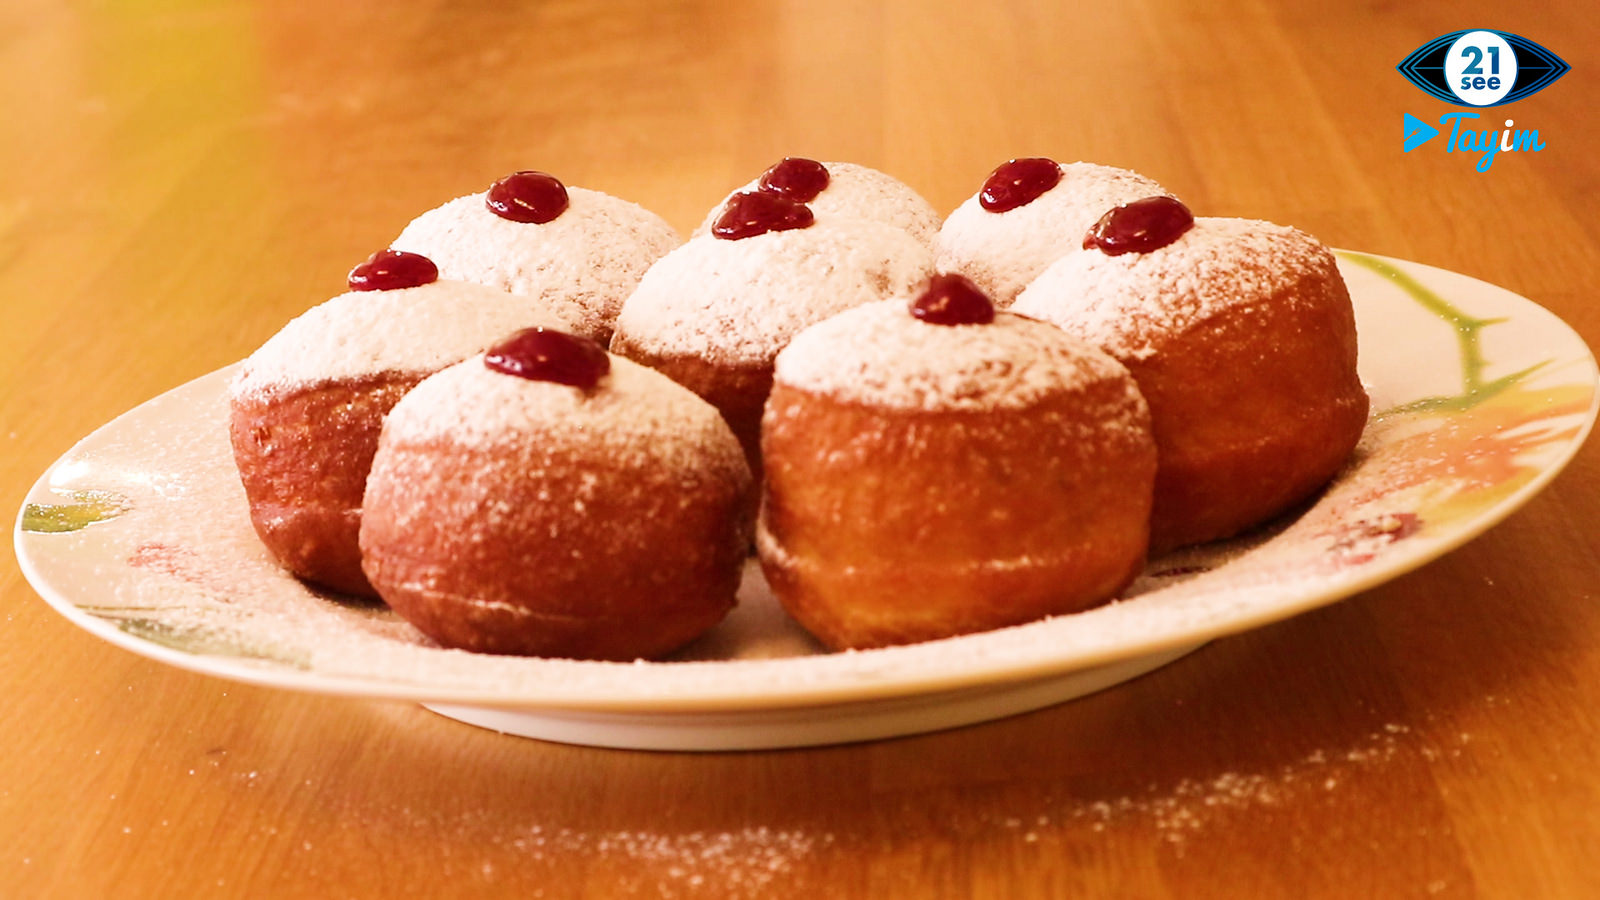 Impress your family and friends with our easy-to-make donuts. Photo: screenshot